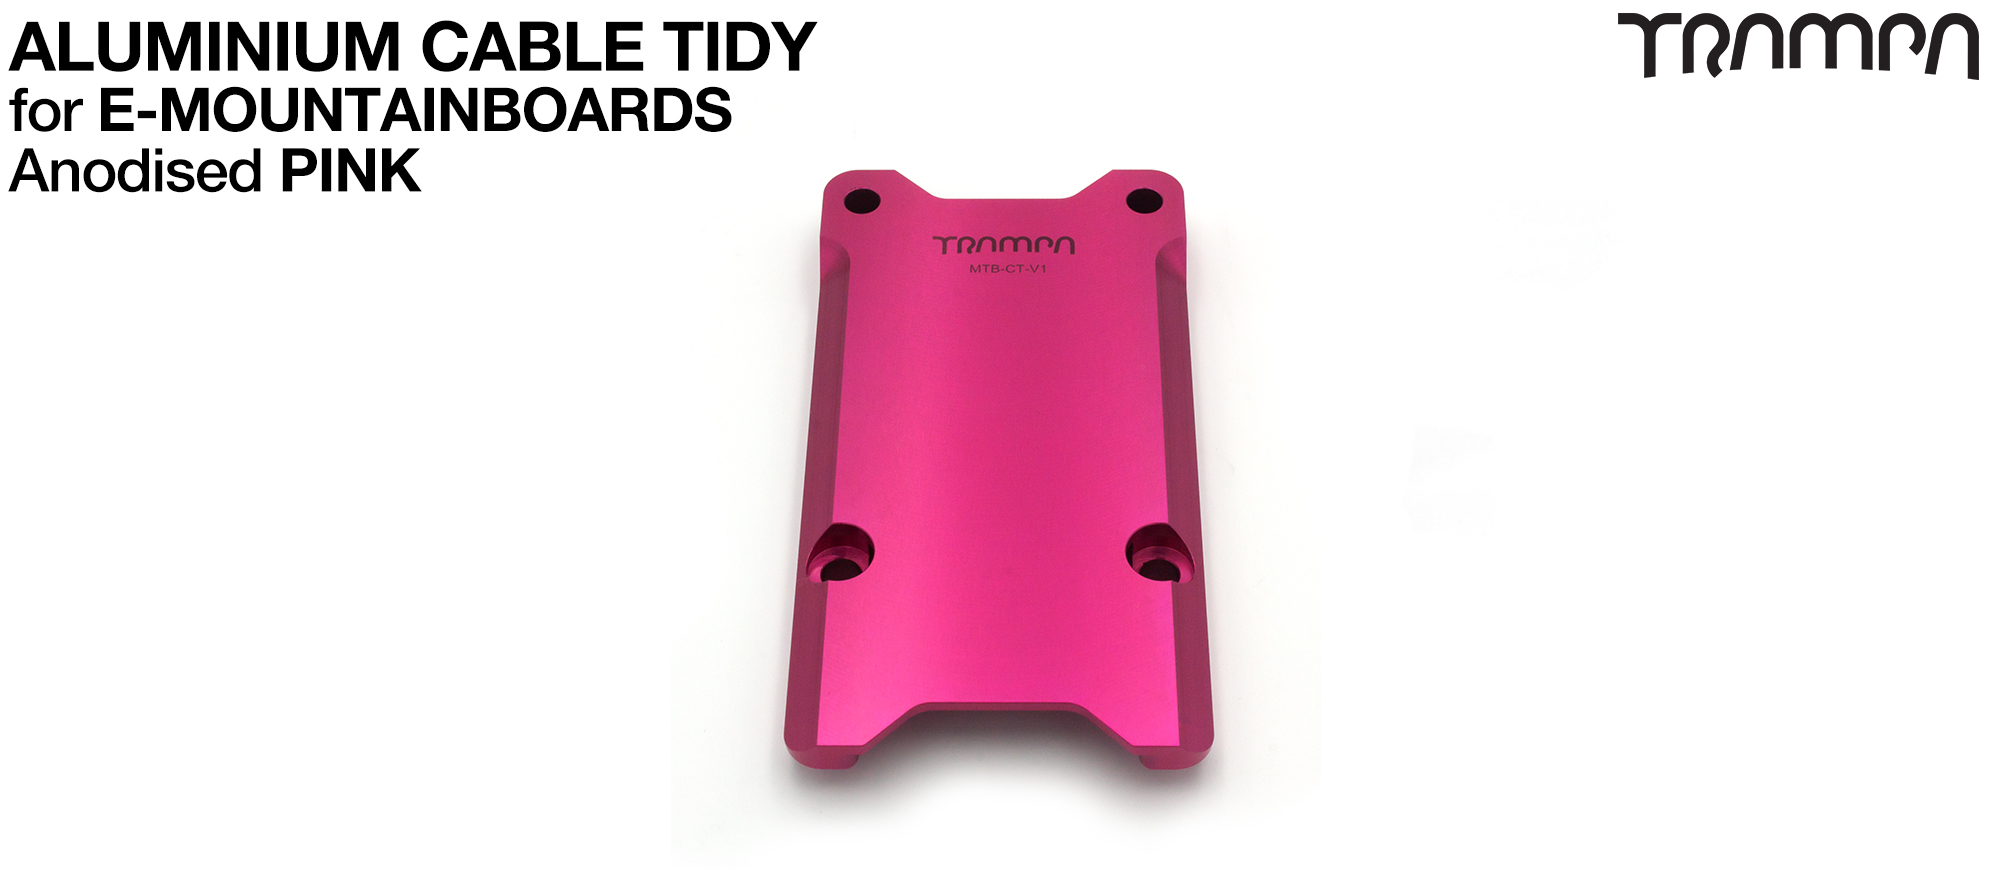 Anodised ALUMINIUM CABLE Router - PINK